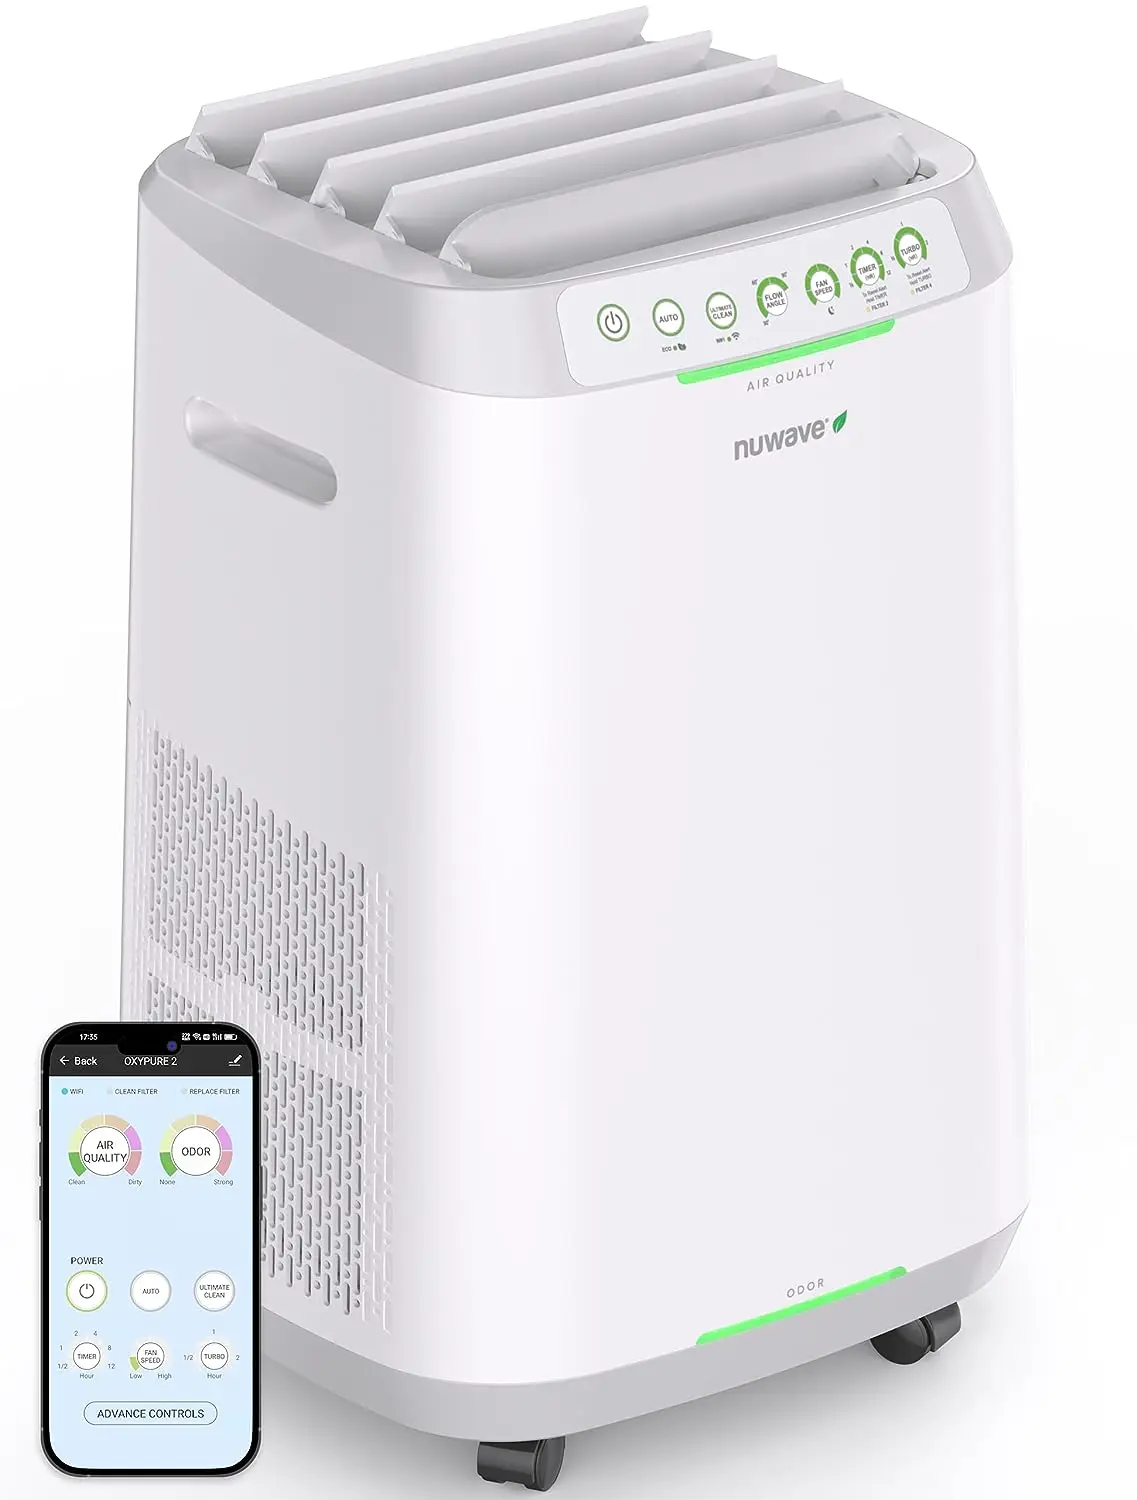 

ZERO Smart Air Purifier, Large Area up to 2,002 Sq Ft, Dual 4-Stage Air Filtration, Adjustable 30°, 60°, 90° Vents, Washable